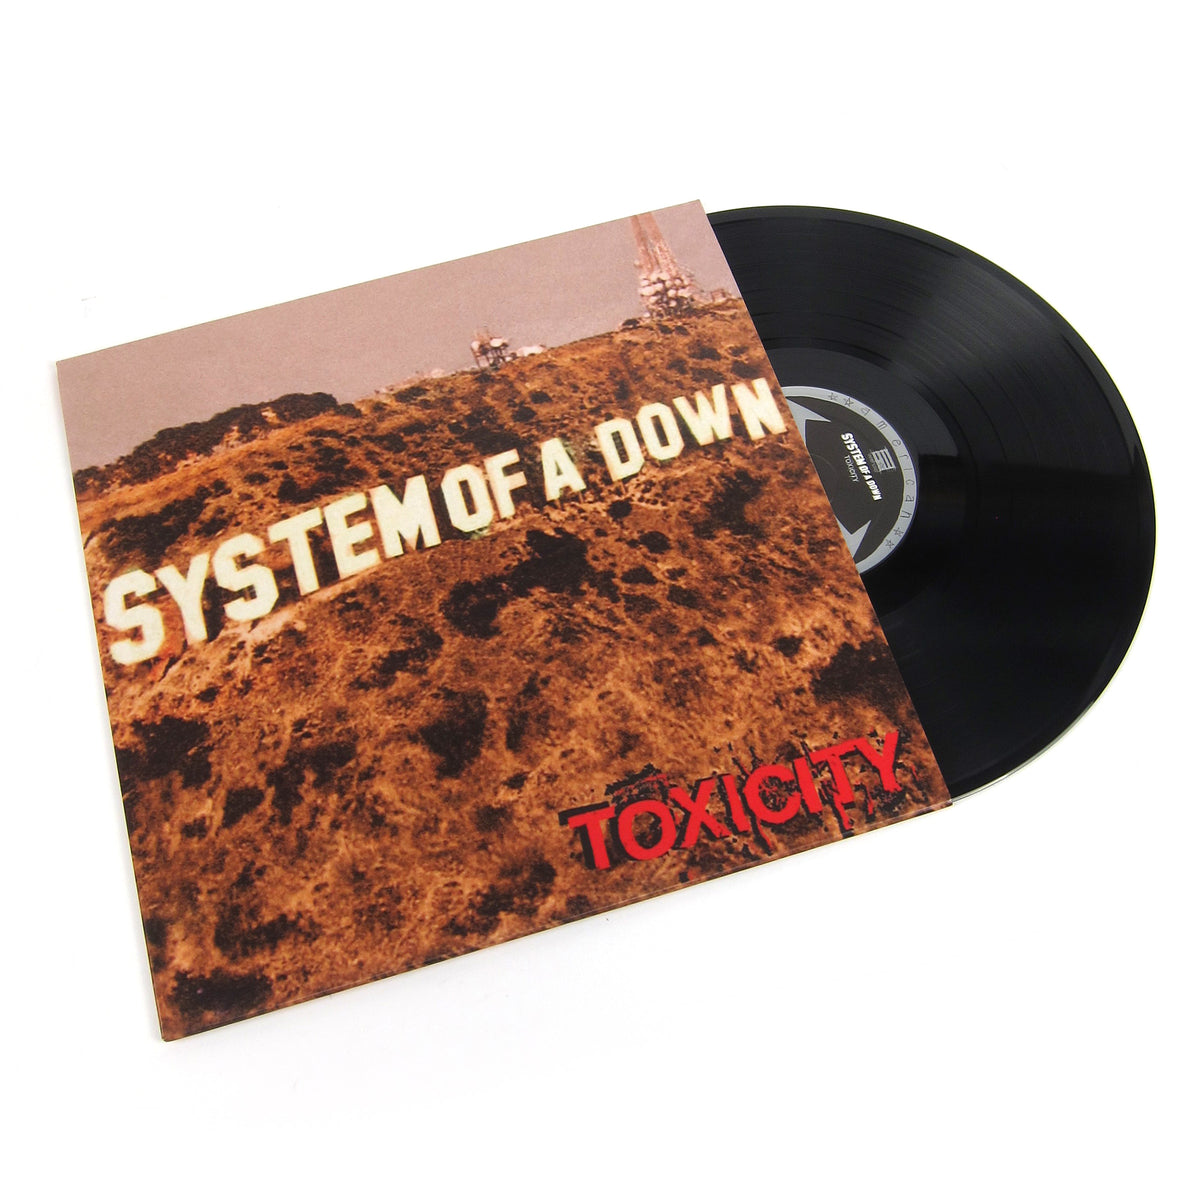 System of a Down 'Toxicity' - Vinyl Me, Please